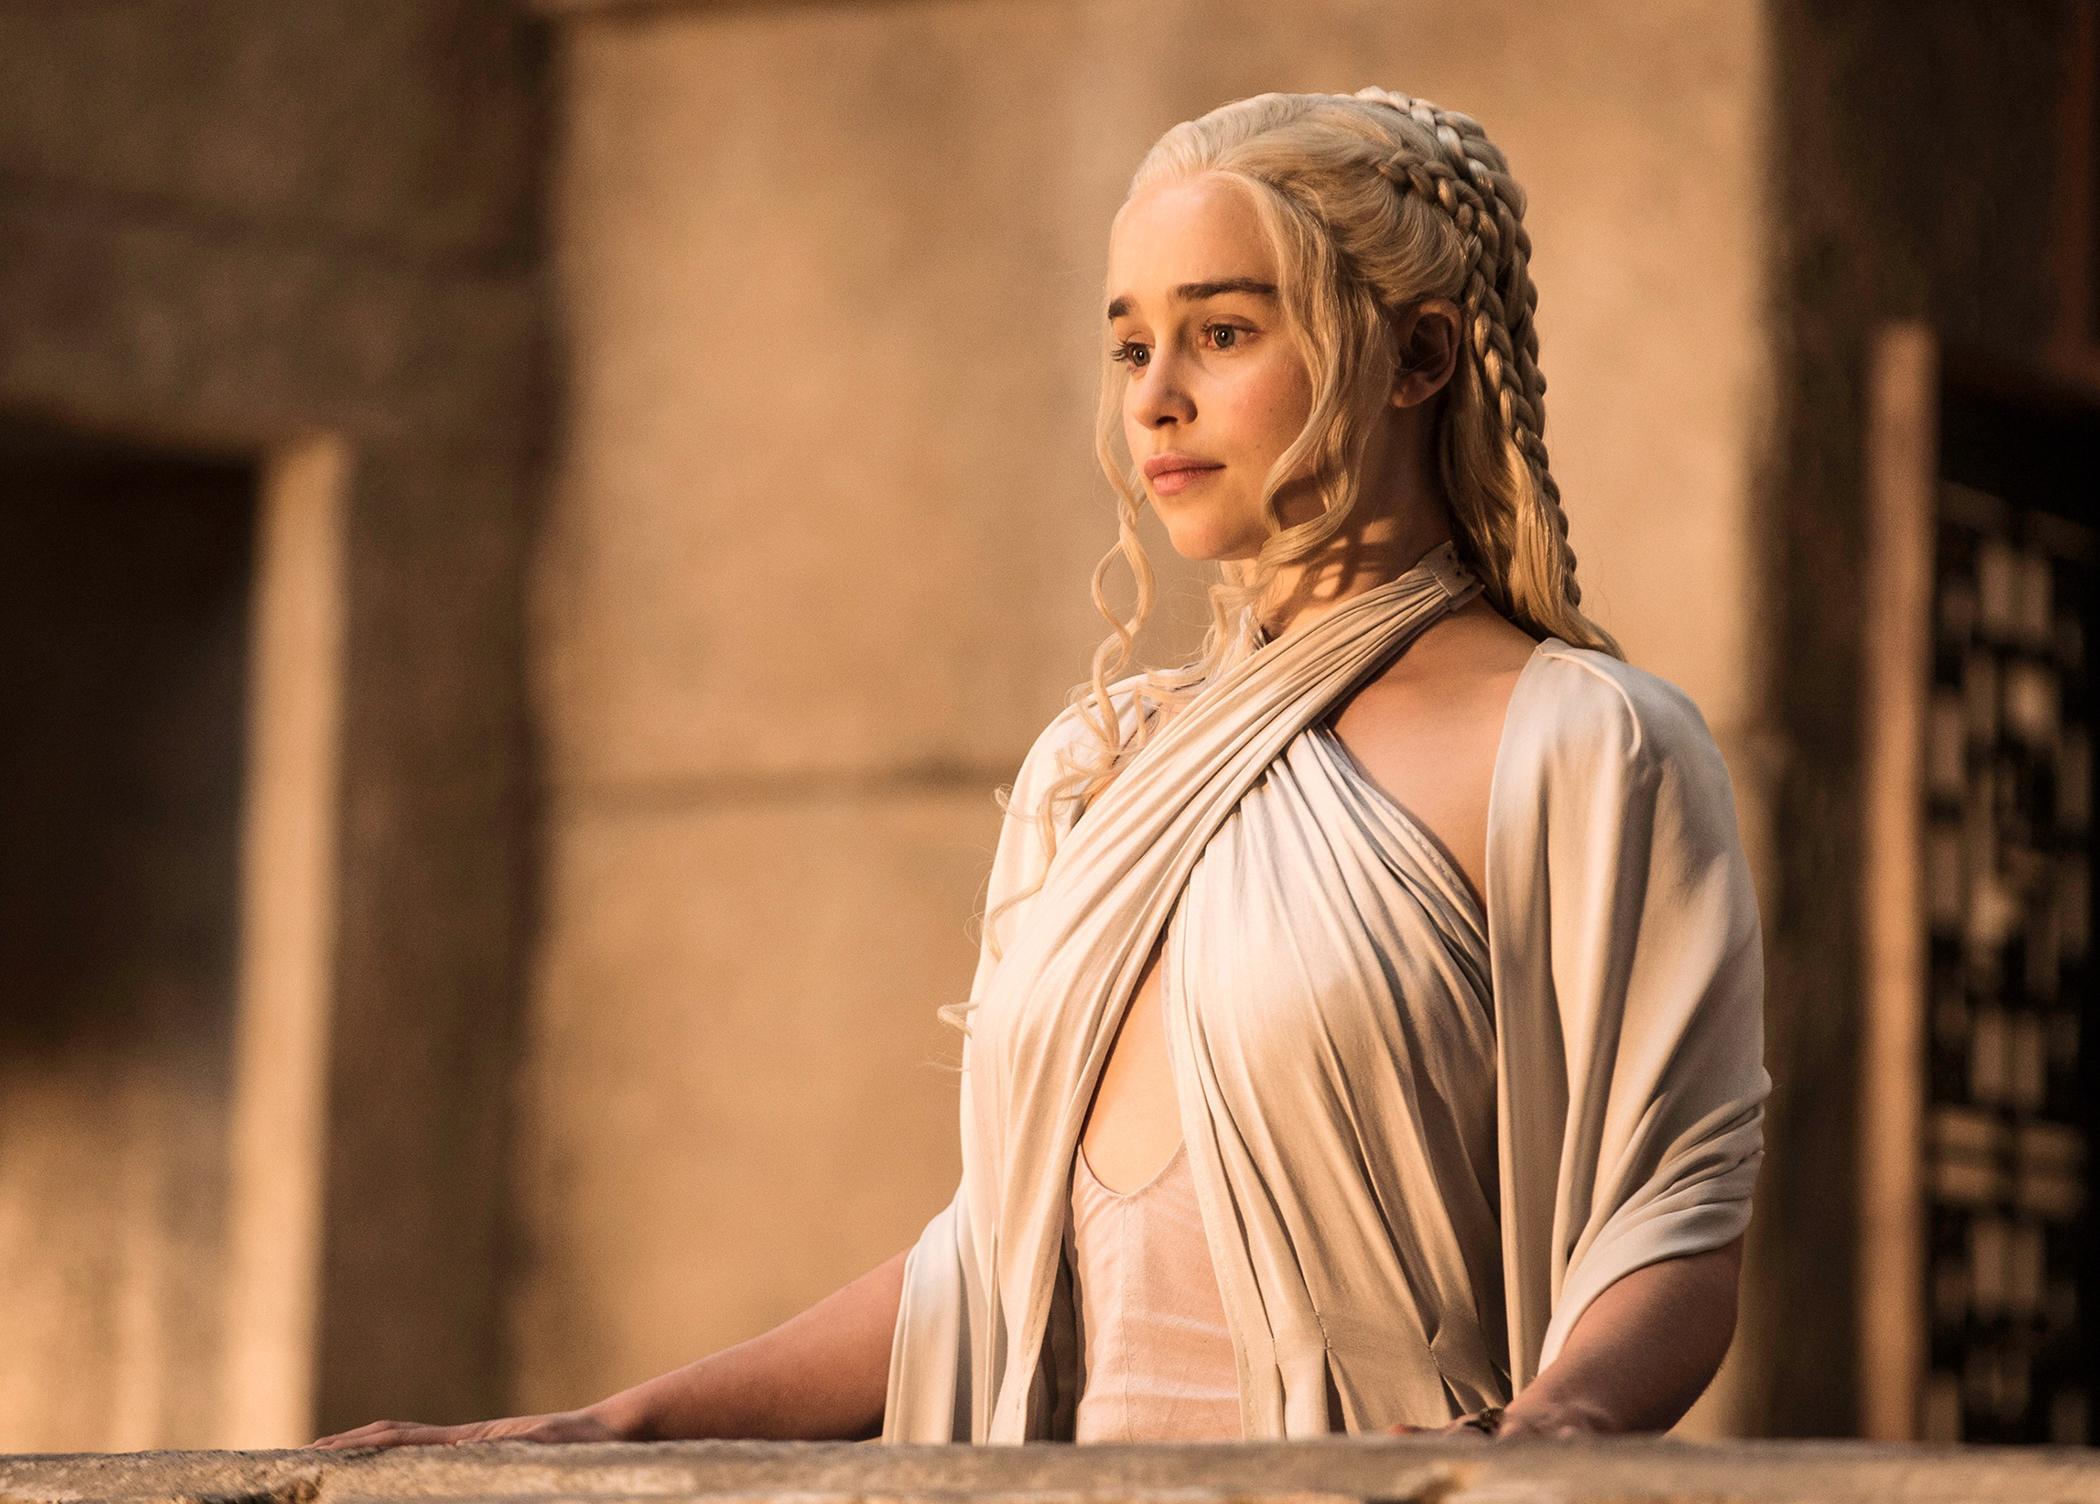 Emilia Clarke in “Game of Thrones” on HBO (Macall B. Polay&mdash;HBO/courtesy Everett Collection)